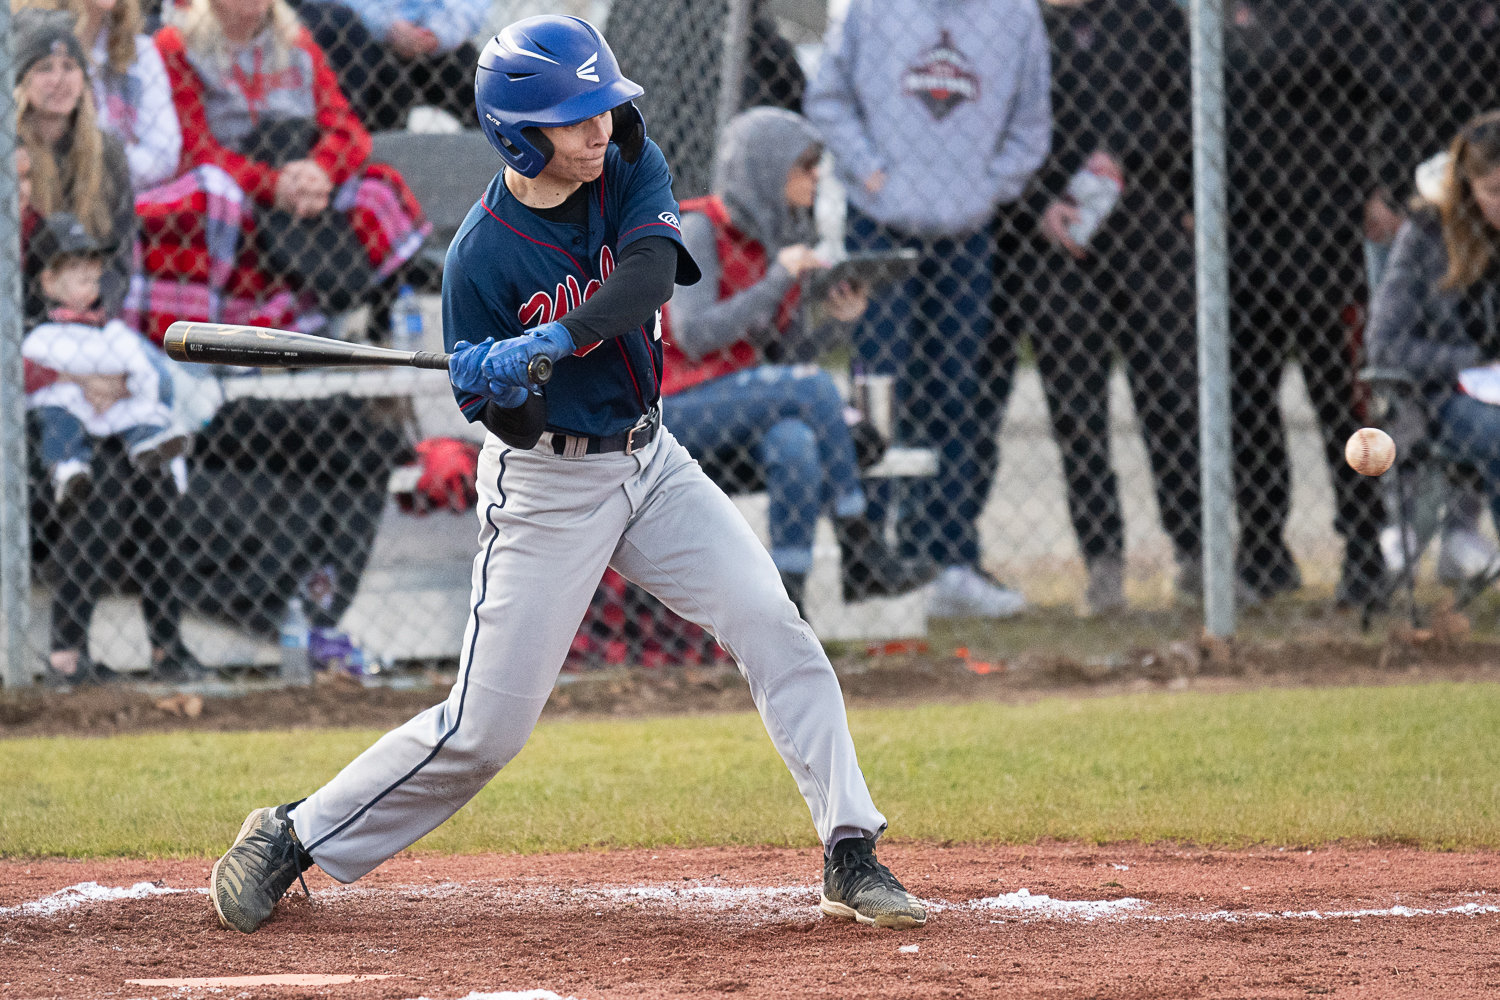 Back Hills' Truman Wimsett chops an infield single during the top of the second inning of the Wolves' 7-4 loss at Tenino on March 14.